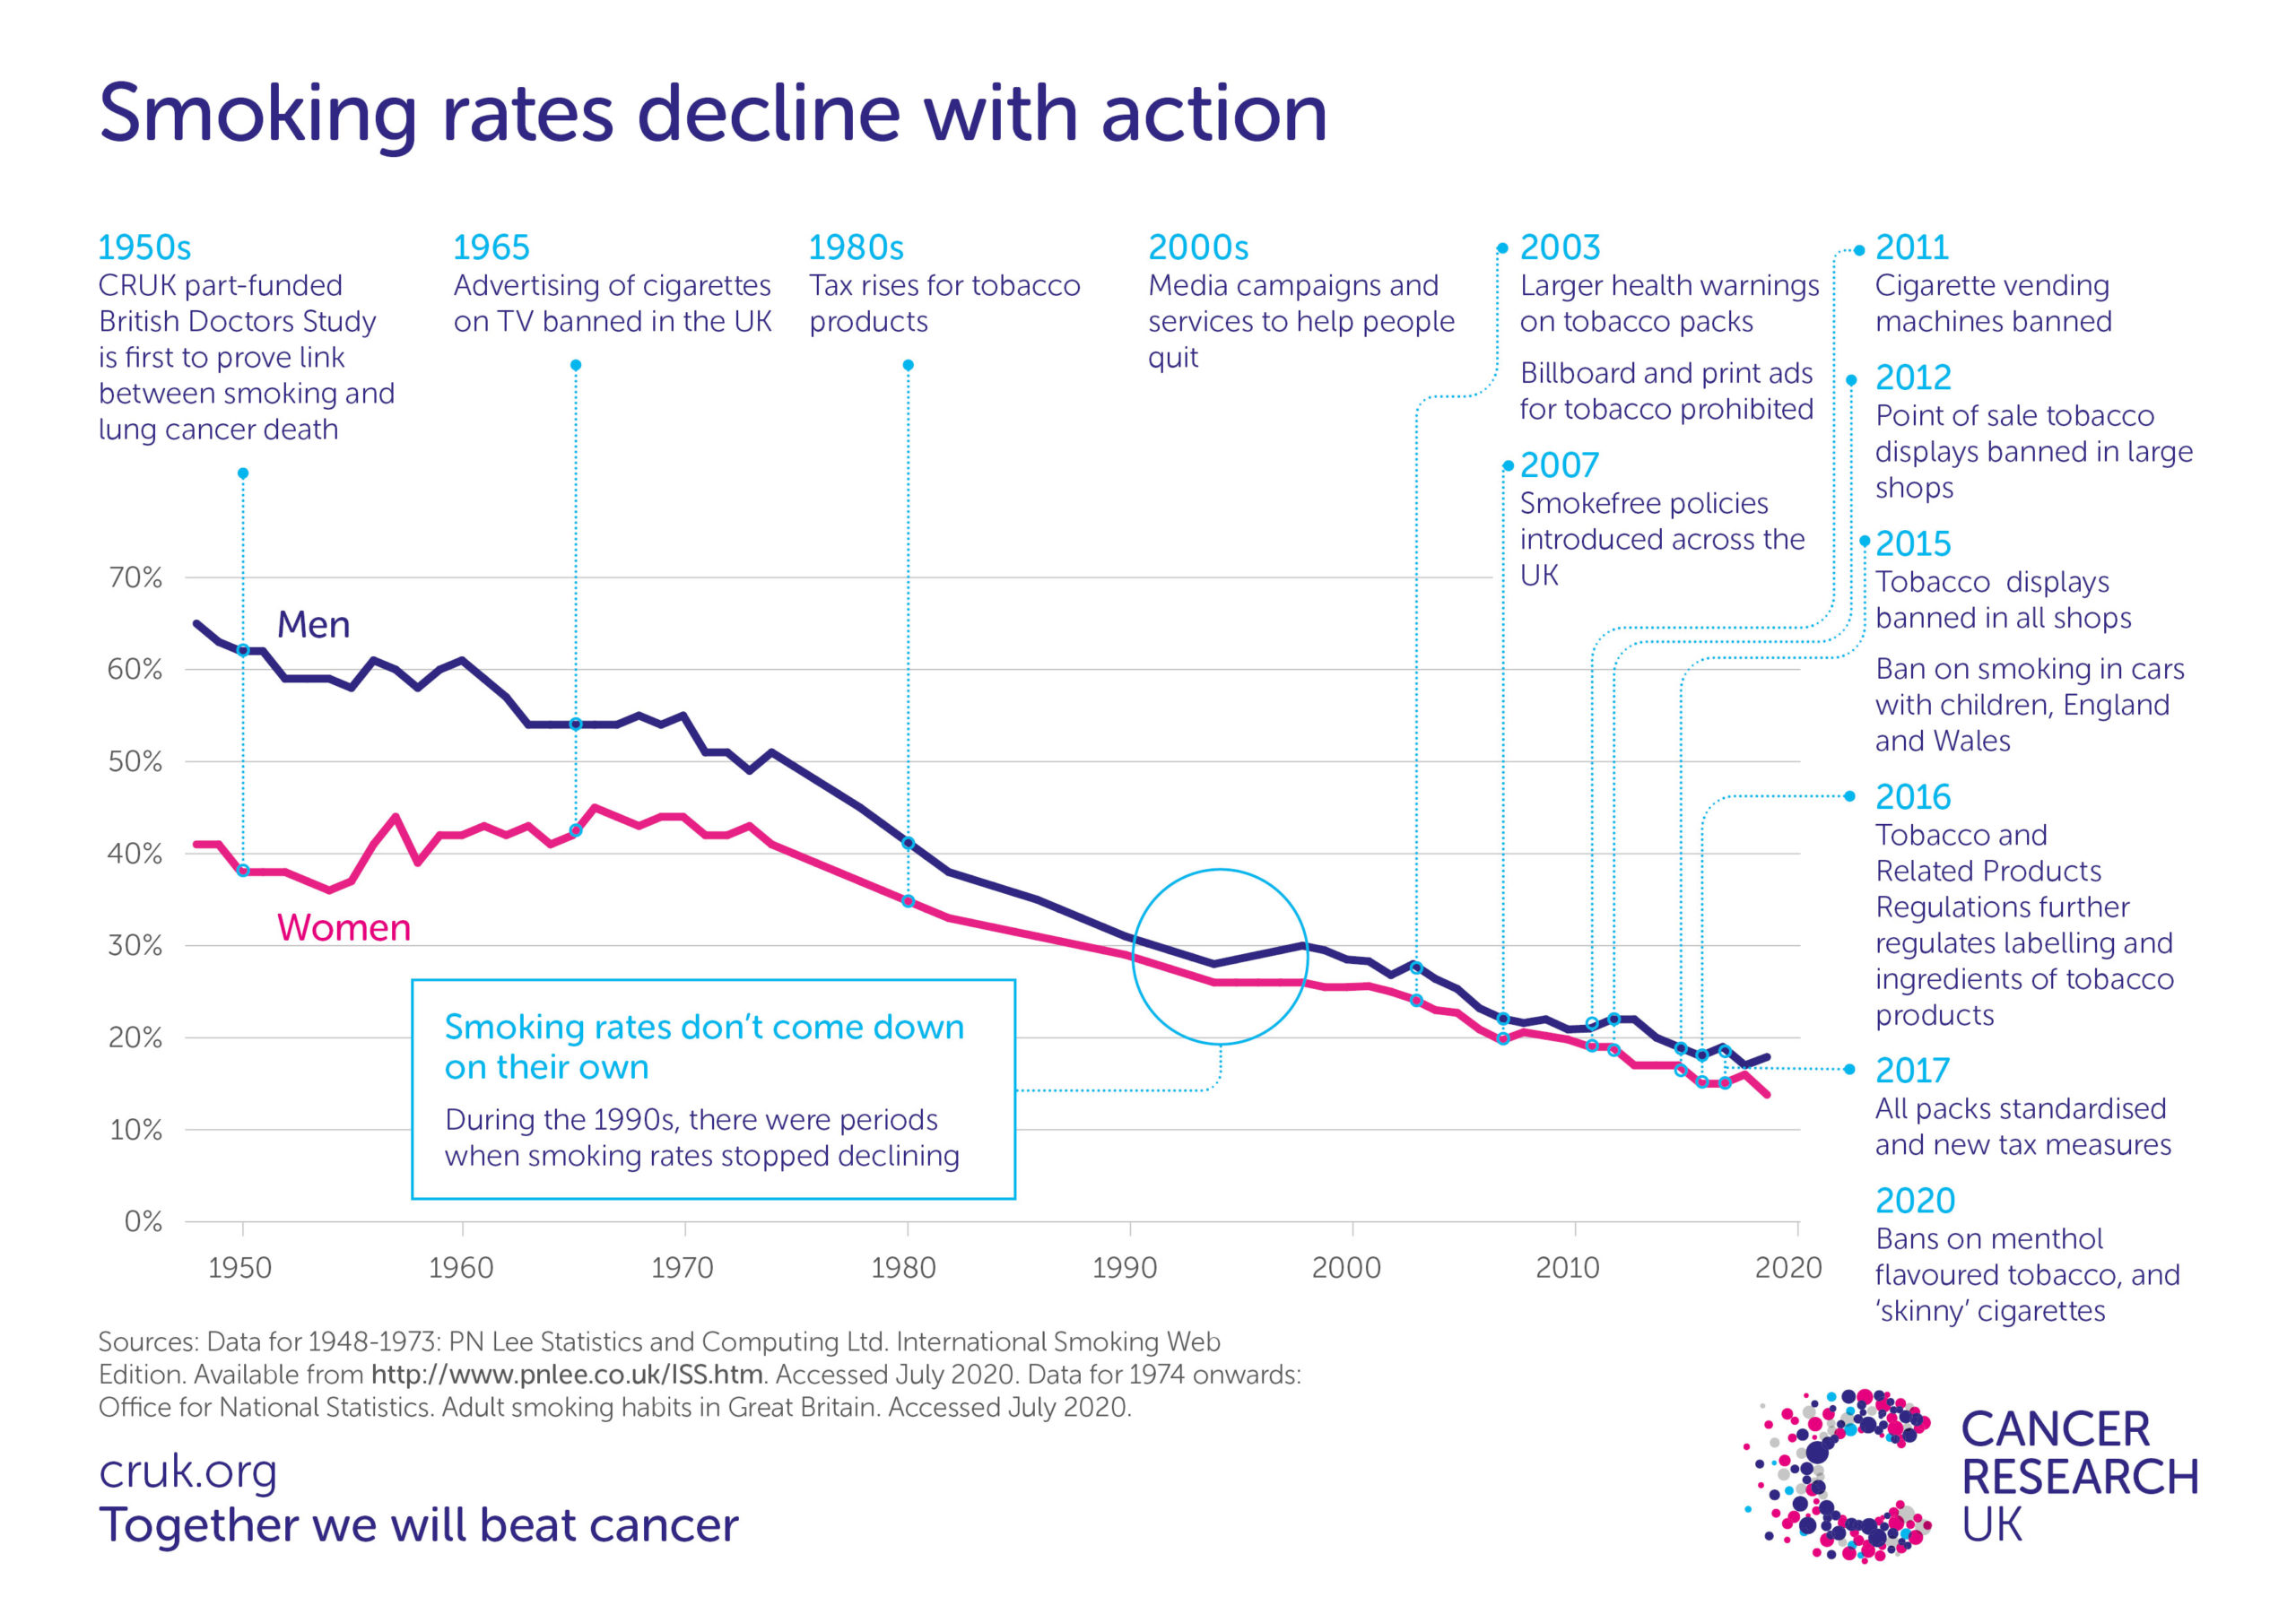 A graph showing the decline in smoking rates between the 1950s and 2020 due to key policy changes